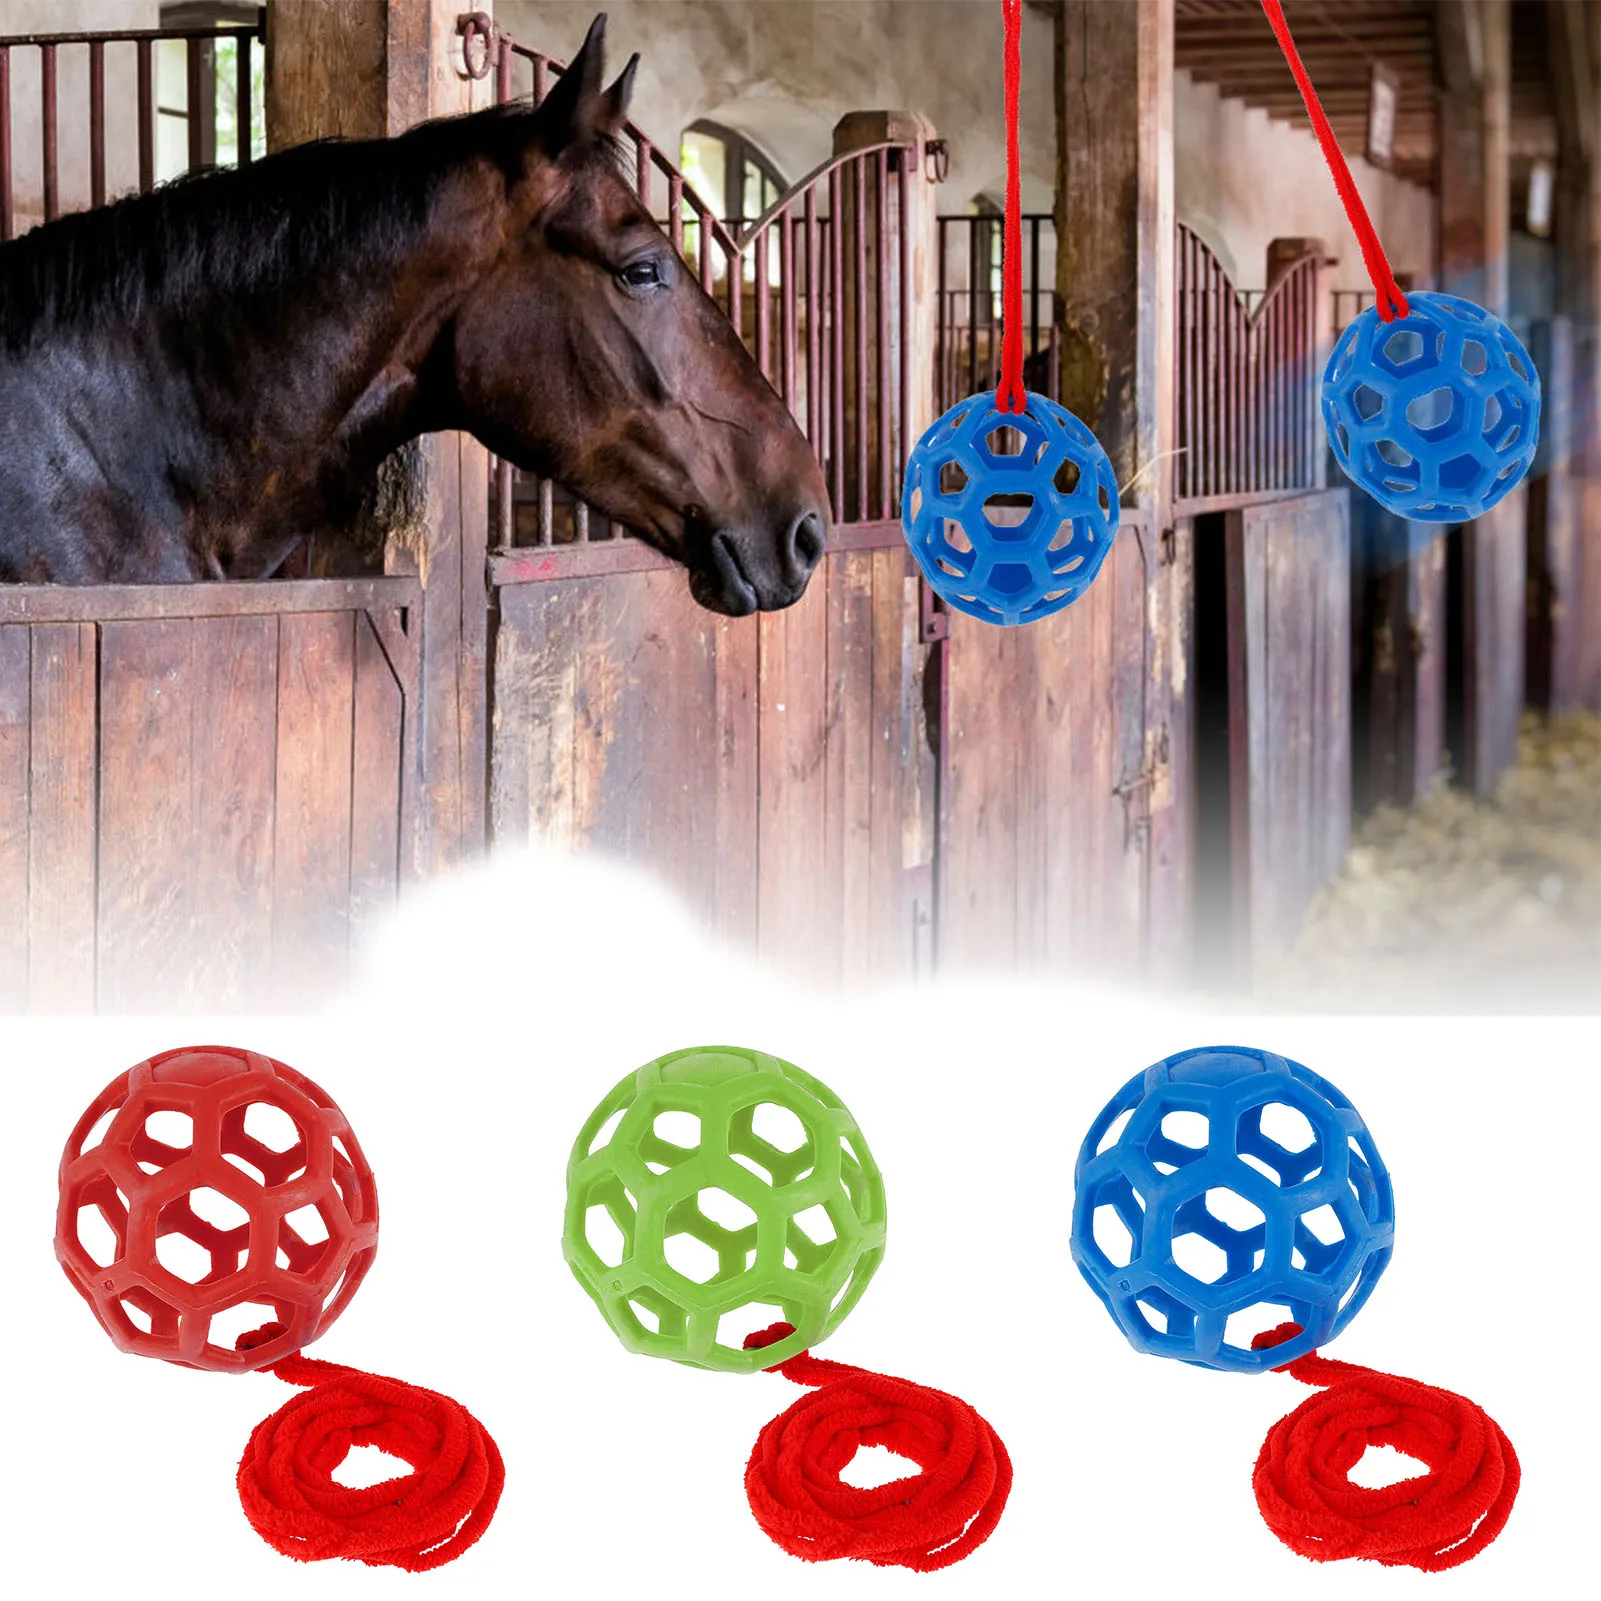 Horse Treat Ball Hay Feeder Toy Ball Hangings Feeding Toy Goat Feeder Ball Hanging Feeding Toy for Horse Stable Stall Relieve Stress 